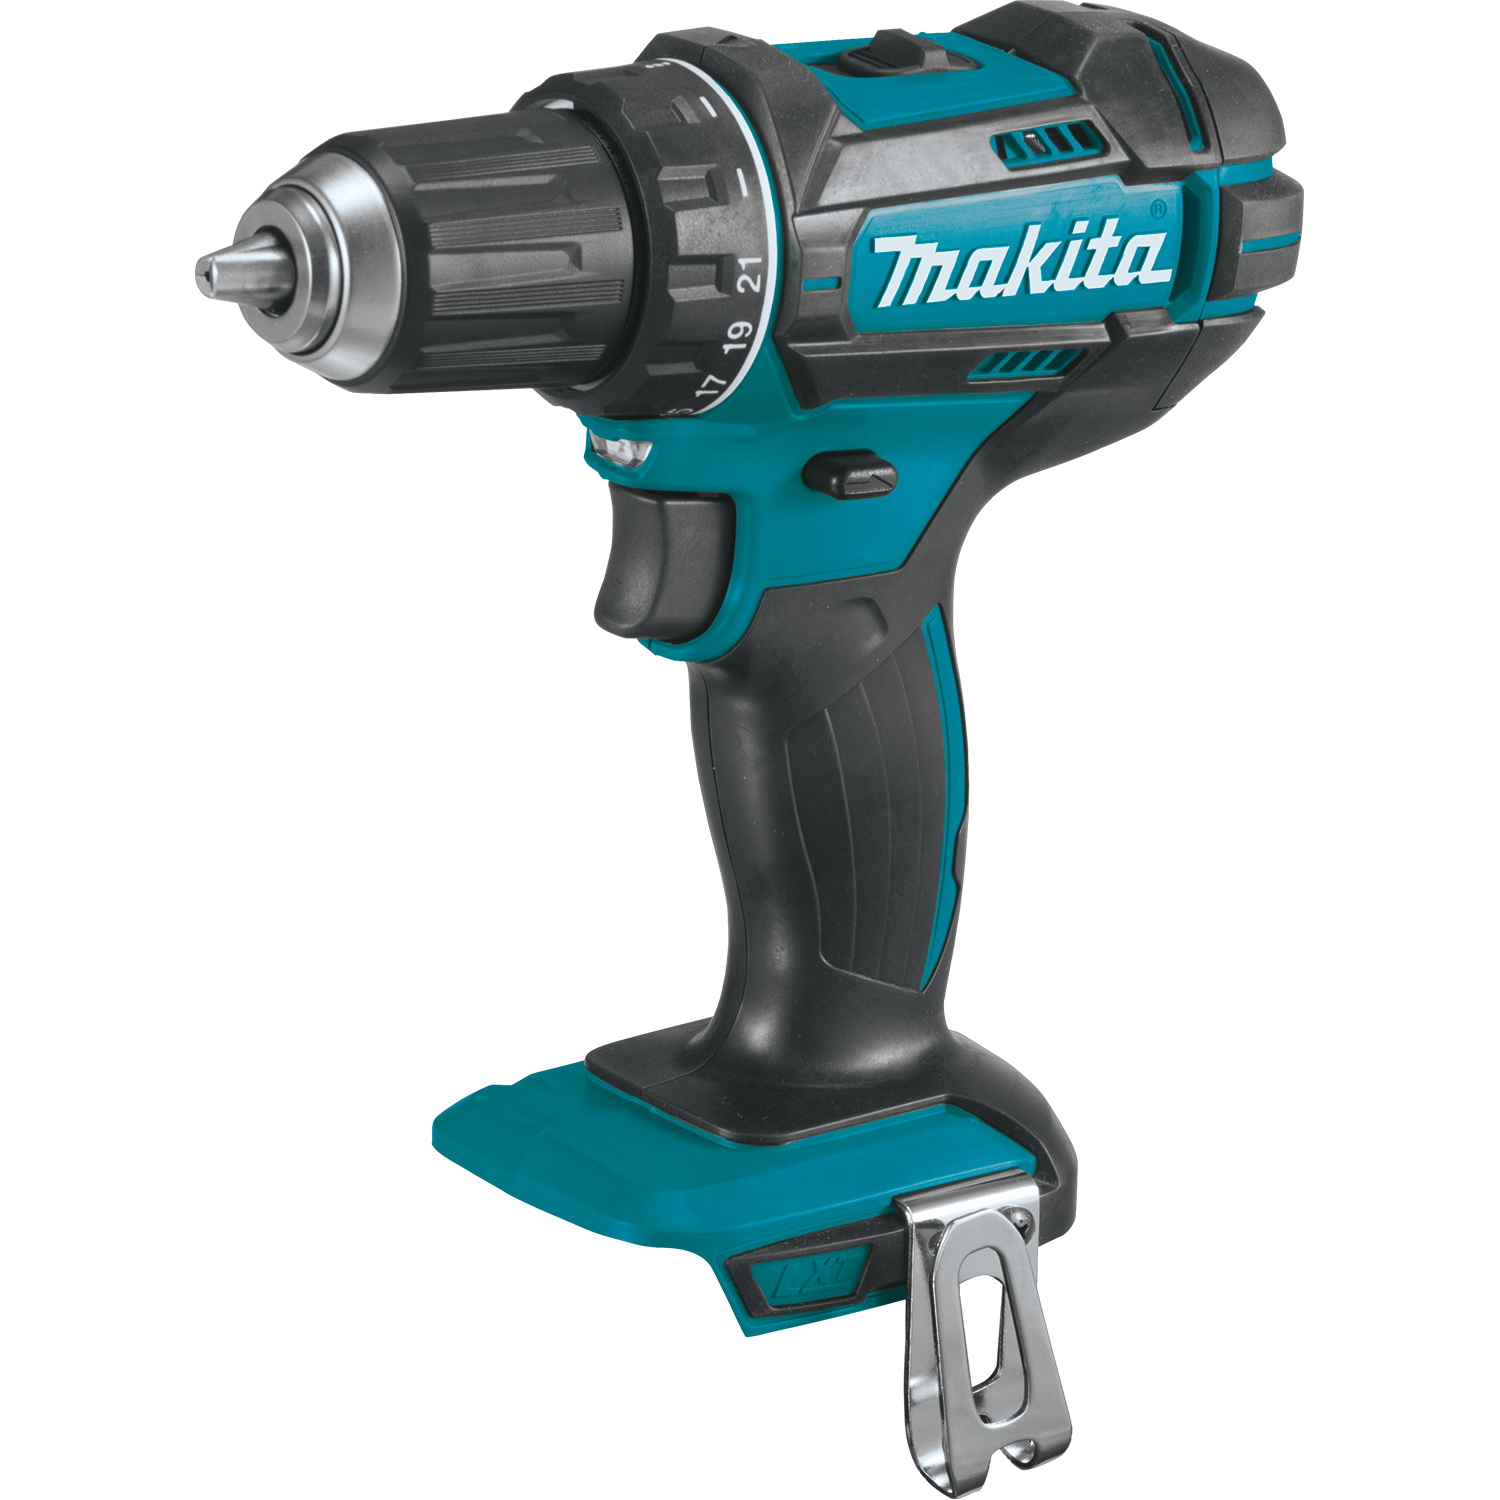 Makita LXT Series XFD10Z Drill Driver, Tool Only, 18 V, 1/2 in Chuck, Ratcheting Chuck - 1